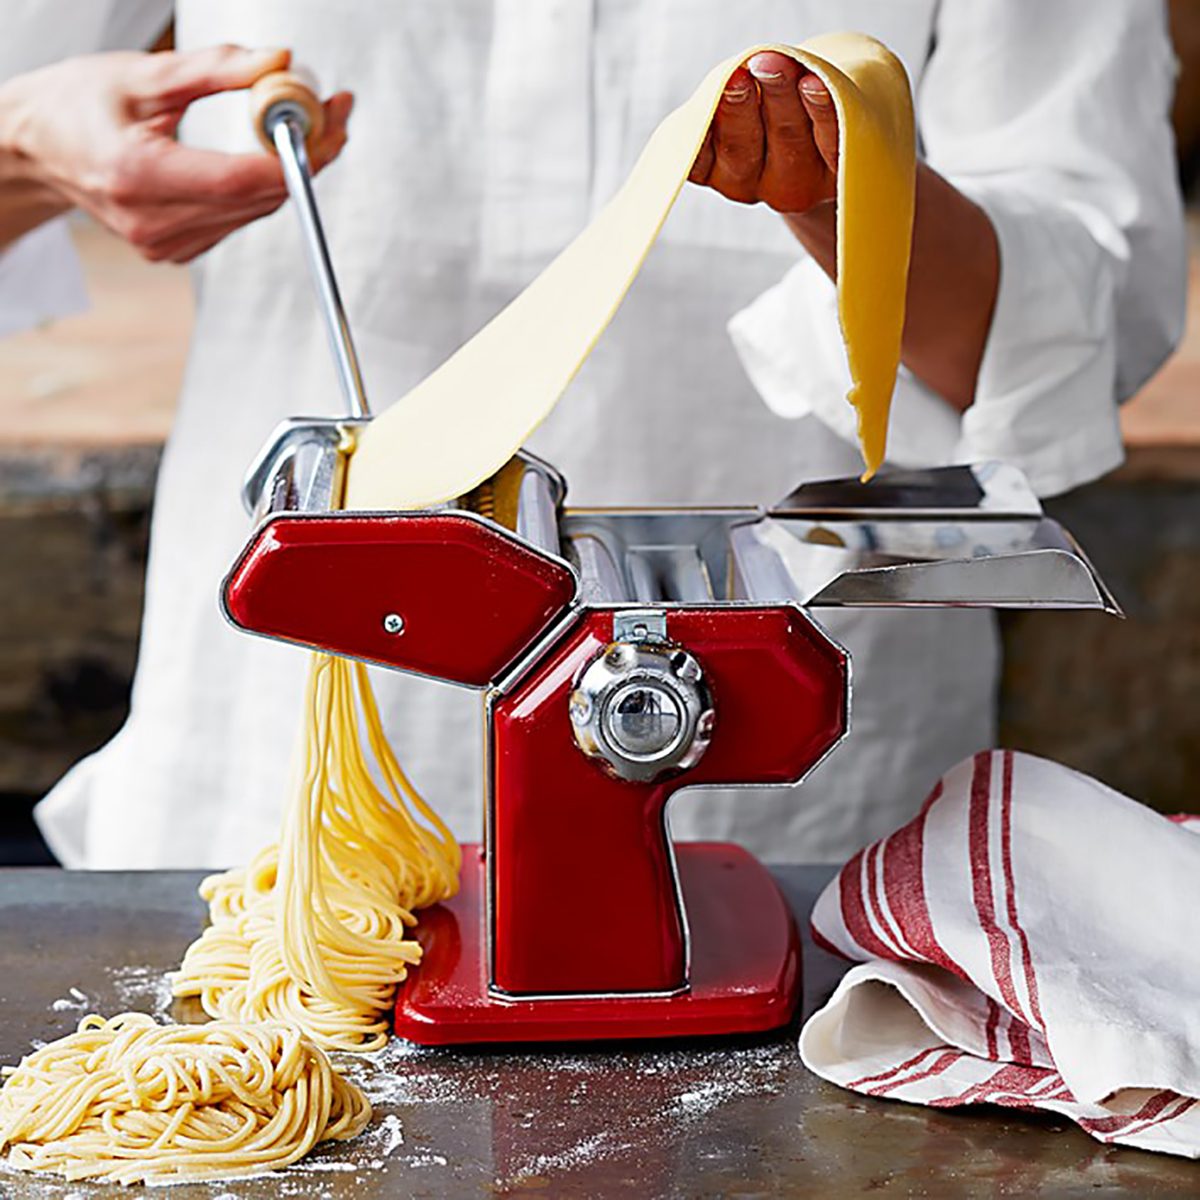 15 of the best gifts for chefs, chosen by chefs